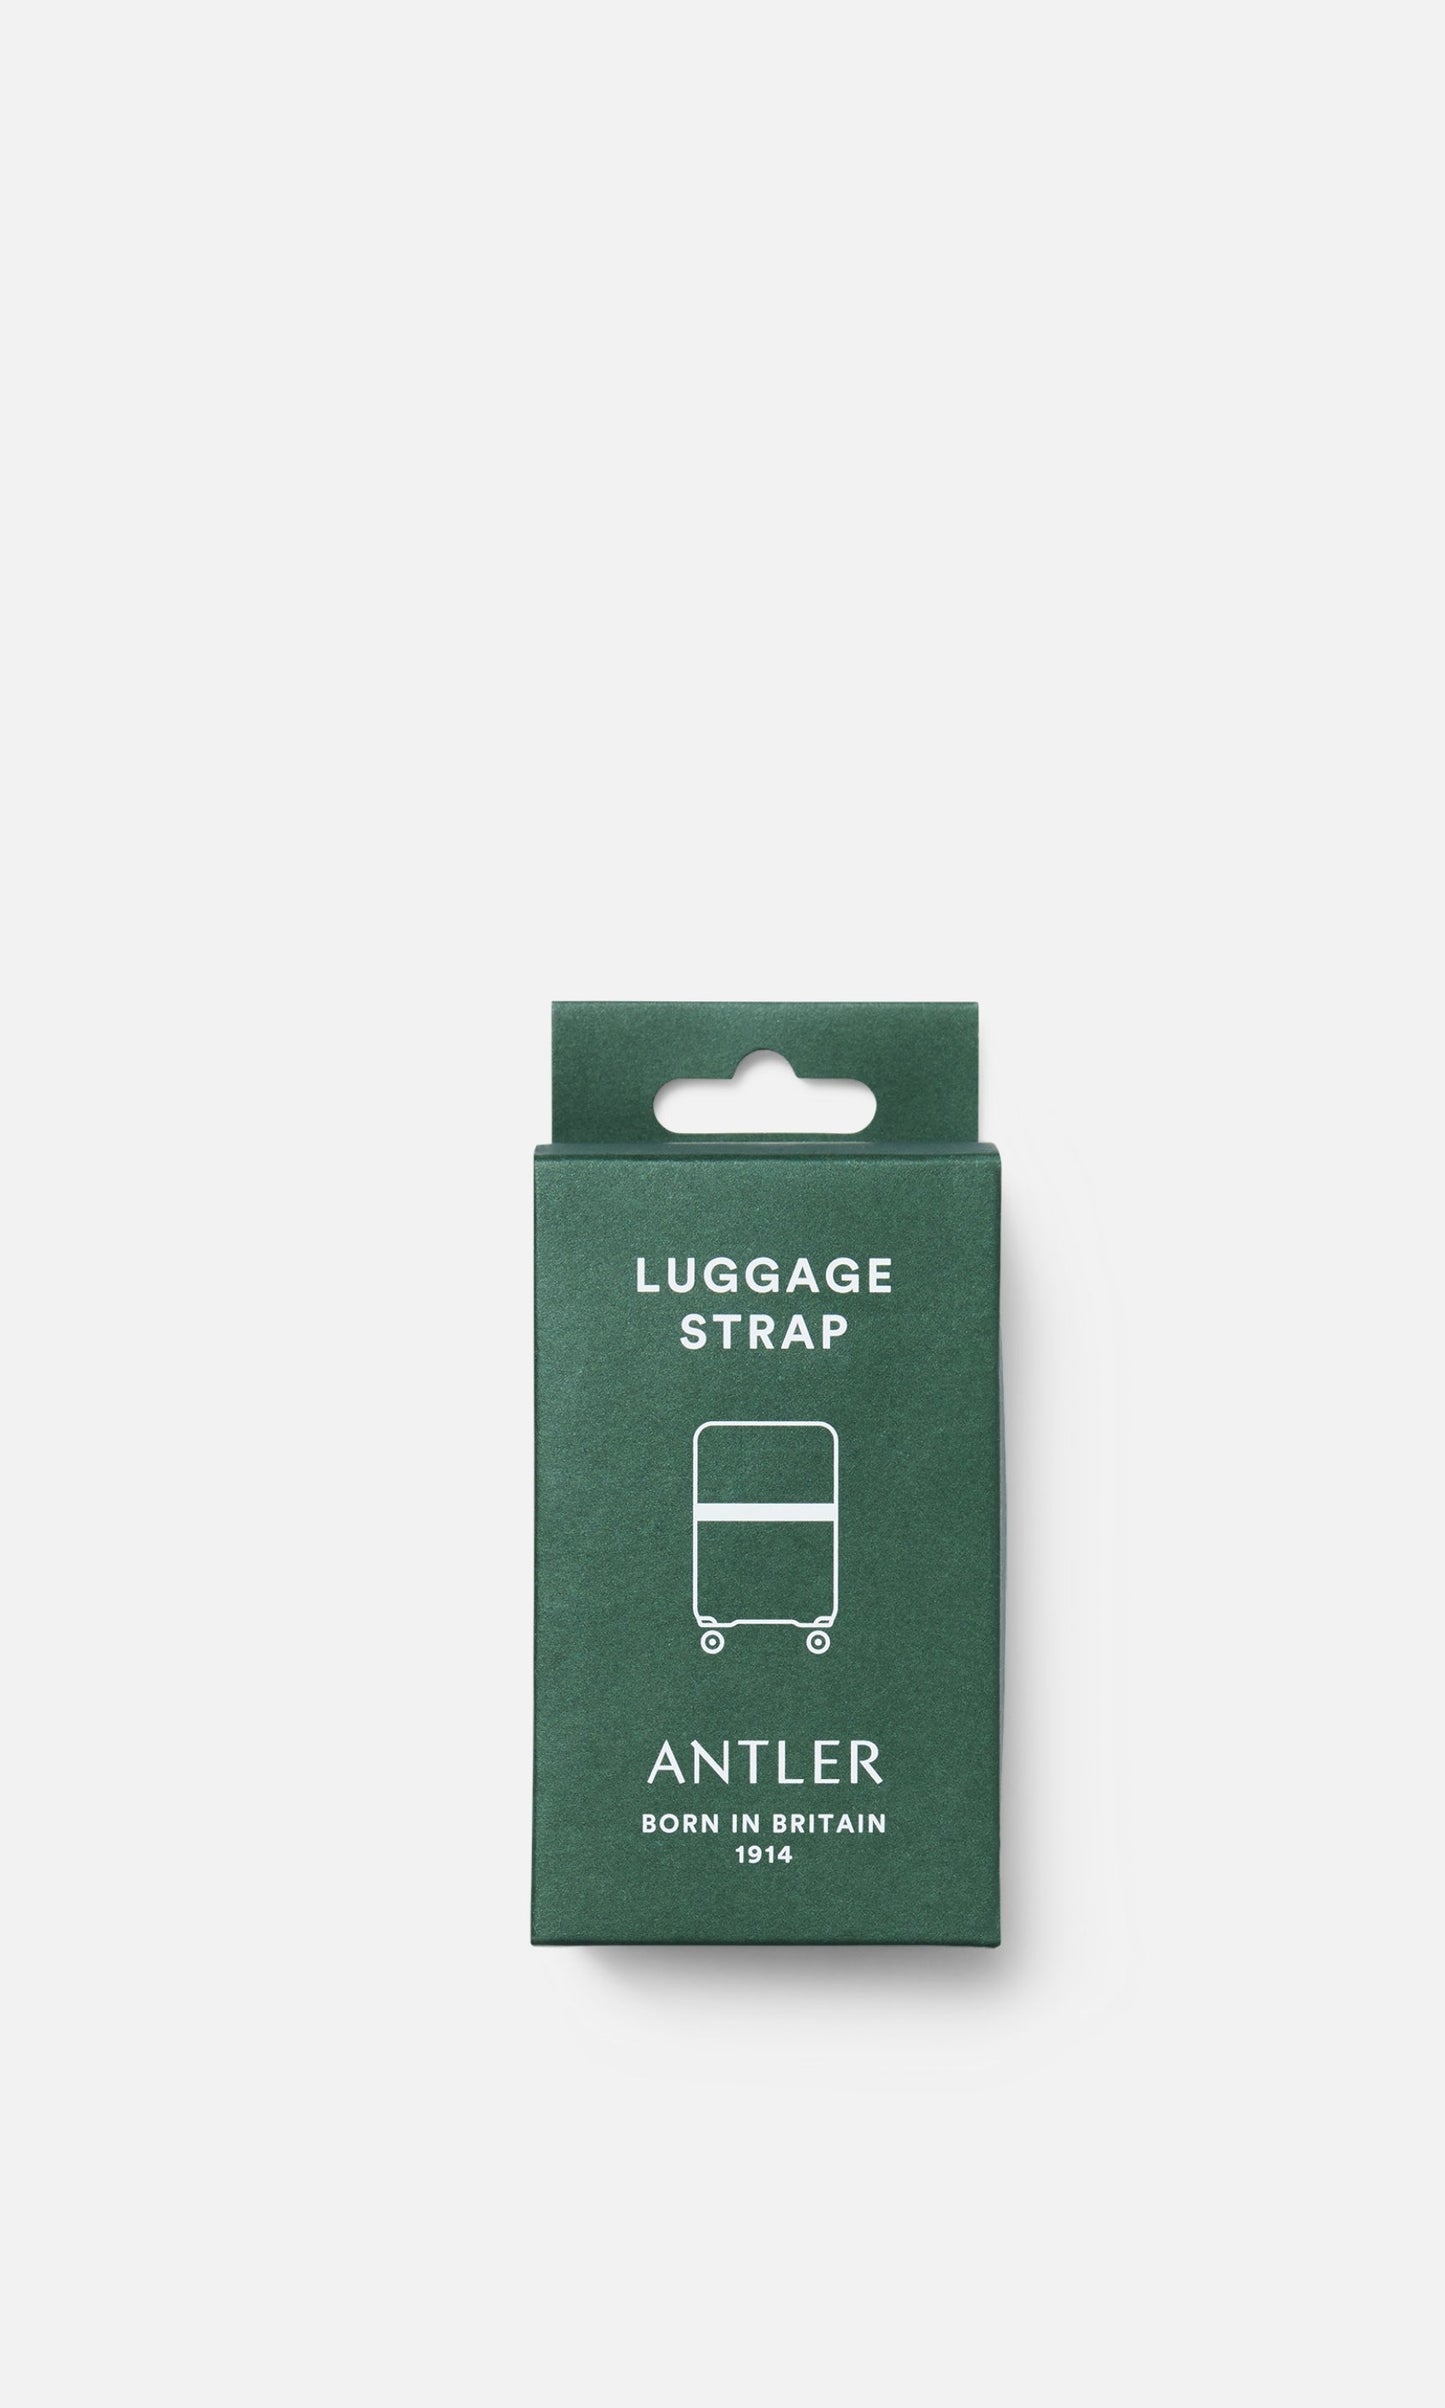 Antler Luggage -  Luggage strap in heather purple - Luggage Straps Luggage strap in purple purple